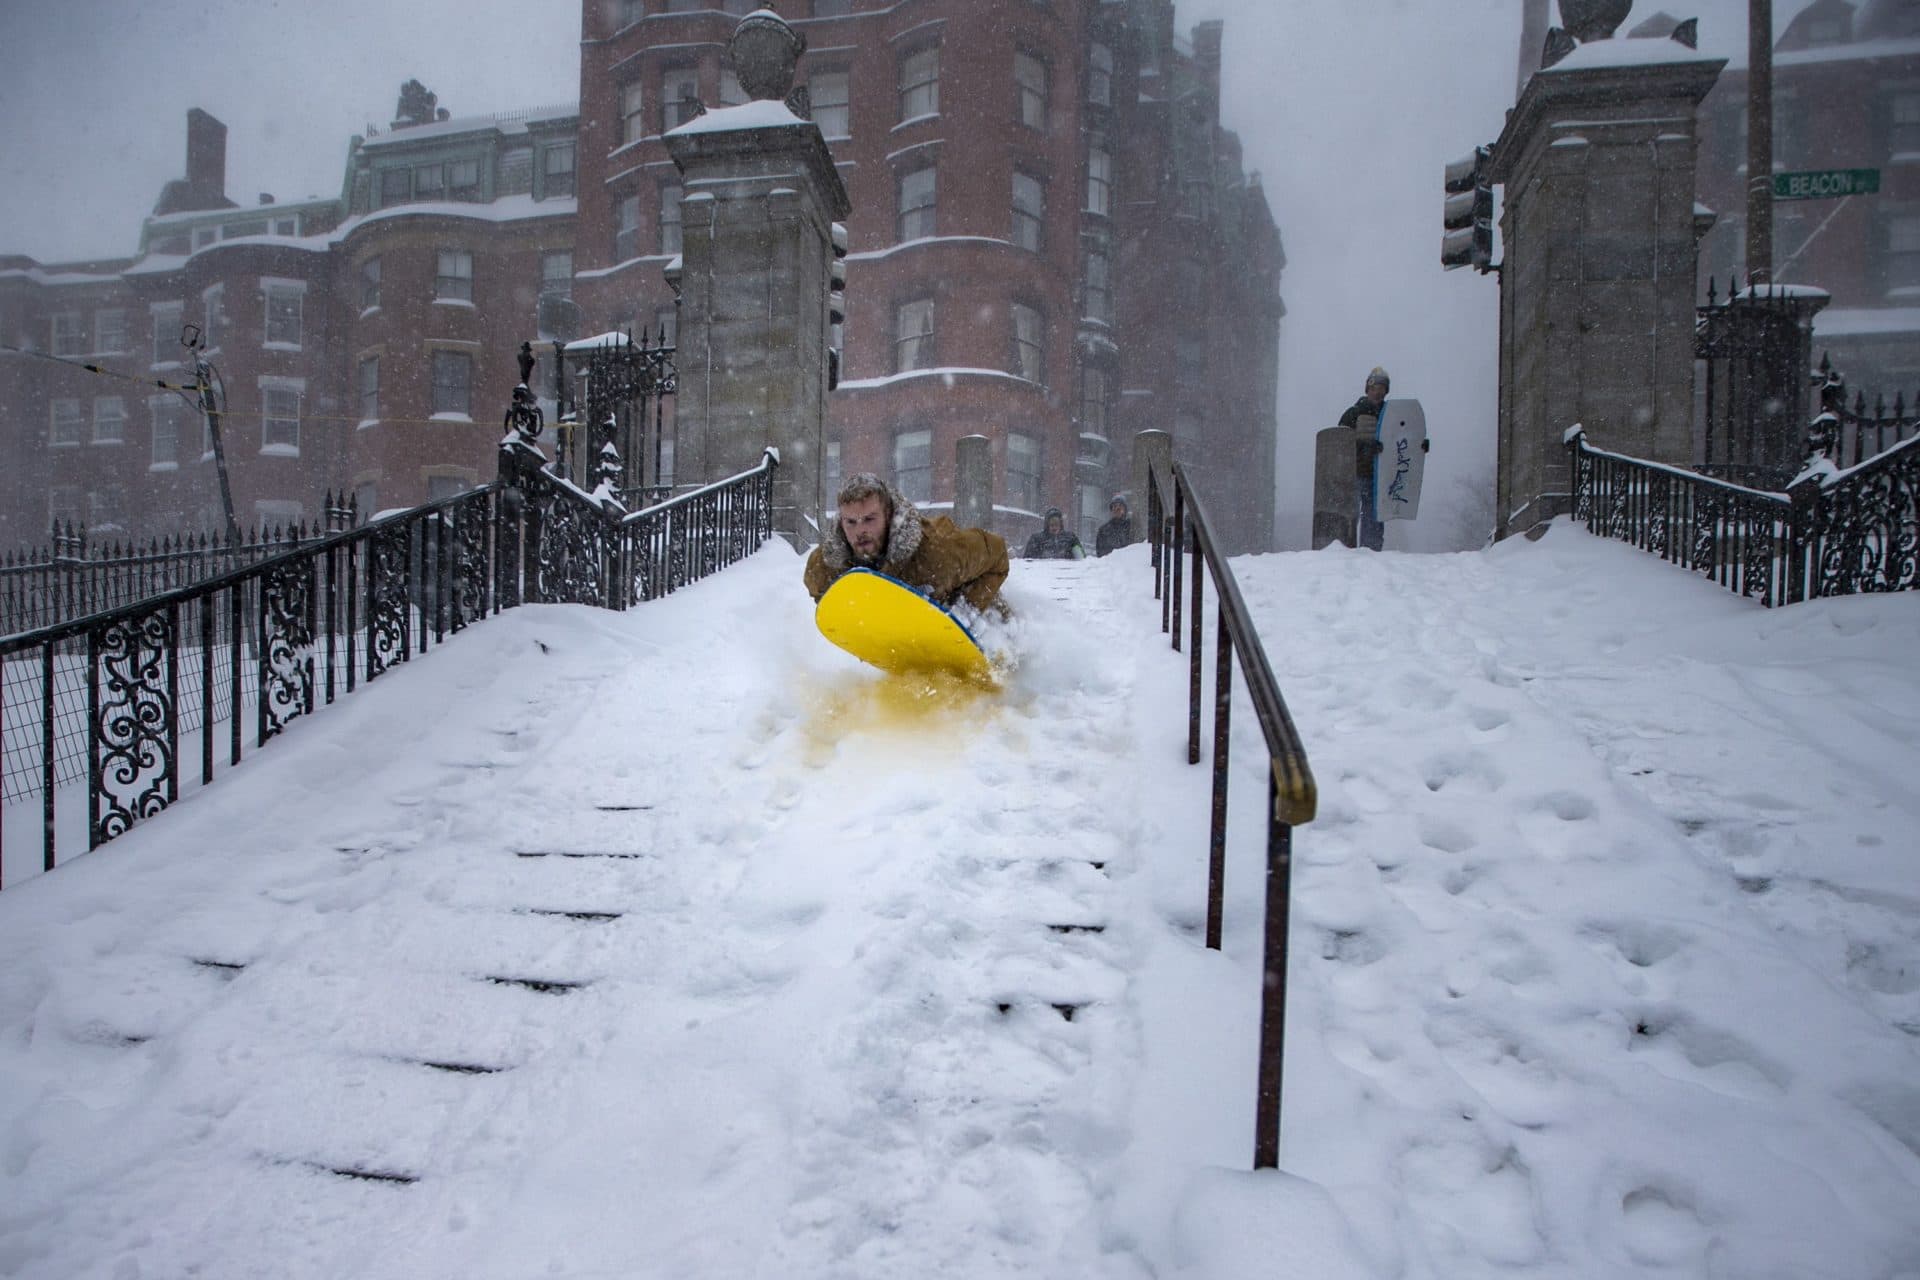 A Suffolk Law student gets some air as he sleds down the snow covered steps leading into the Boston Common. (Jesse Costa/WBUR)